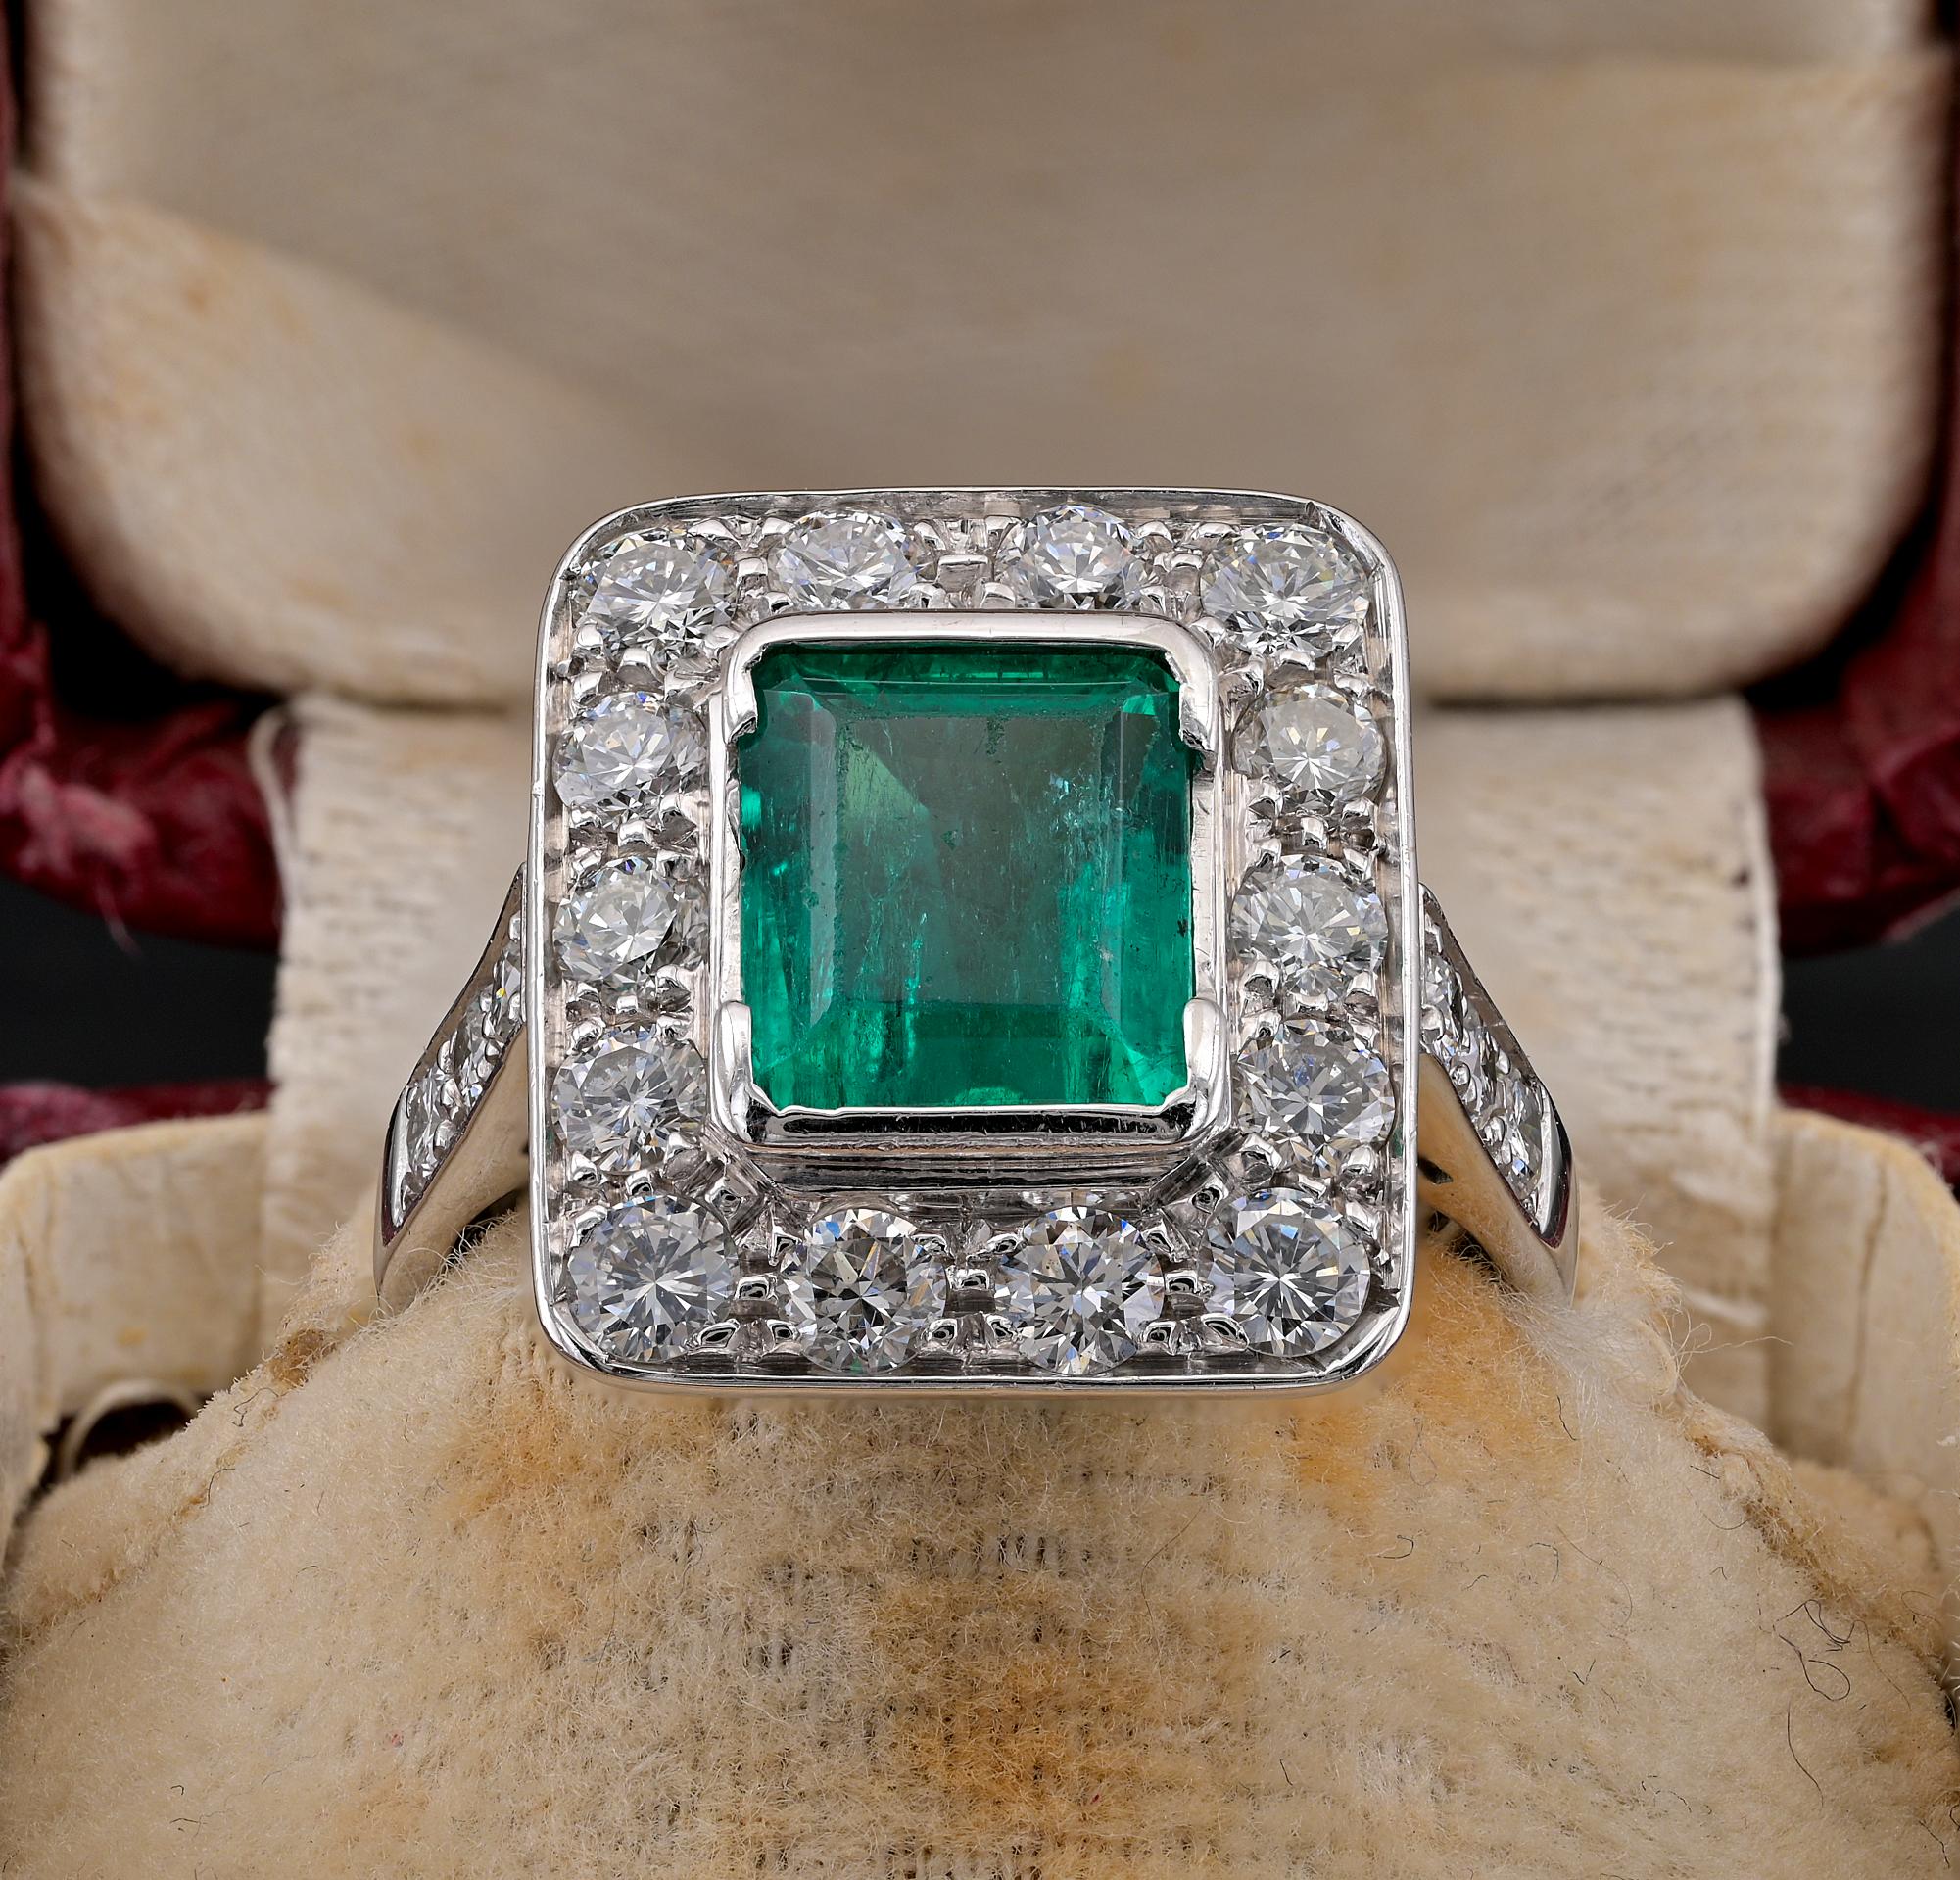 This breathtaking Art Deco Emerald and Diamond ring is 1930 Ca
Hand crafted of solid 18 KT gold in a classy design, skilfully hand made in a charming design
The wide crown takes shape form its inner Emerald surrounded by a rich Diamond frame
Emerald